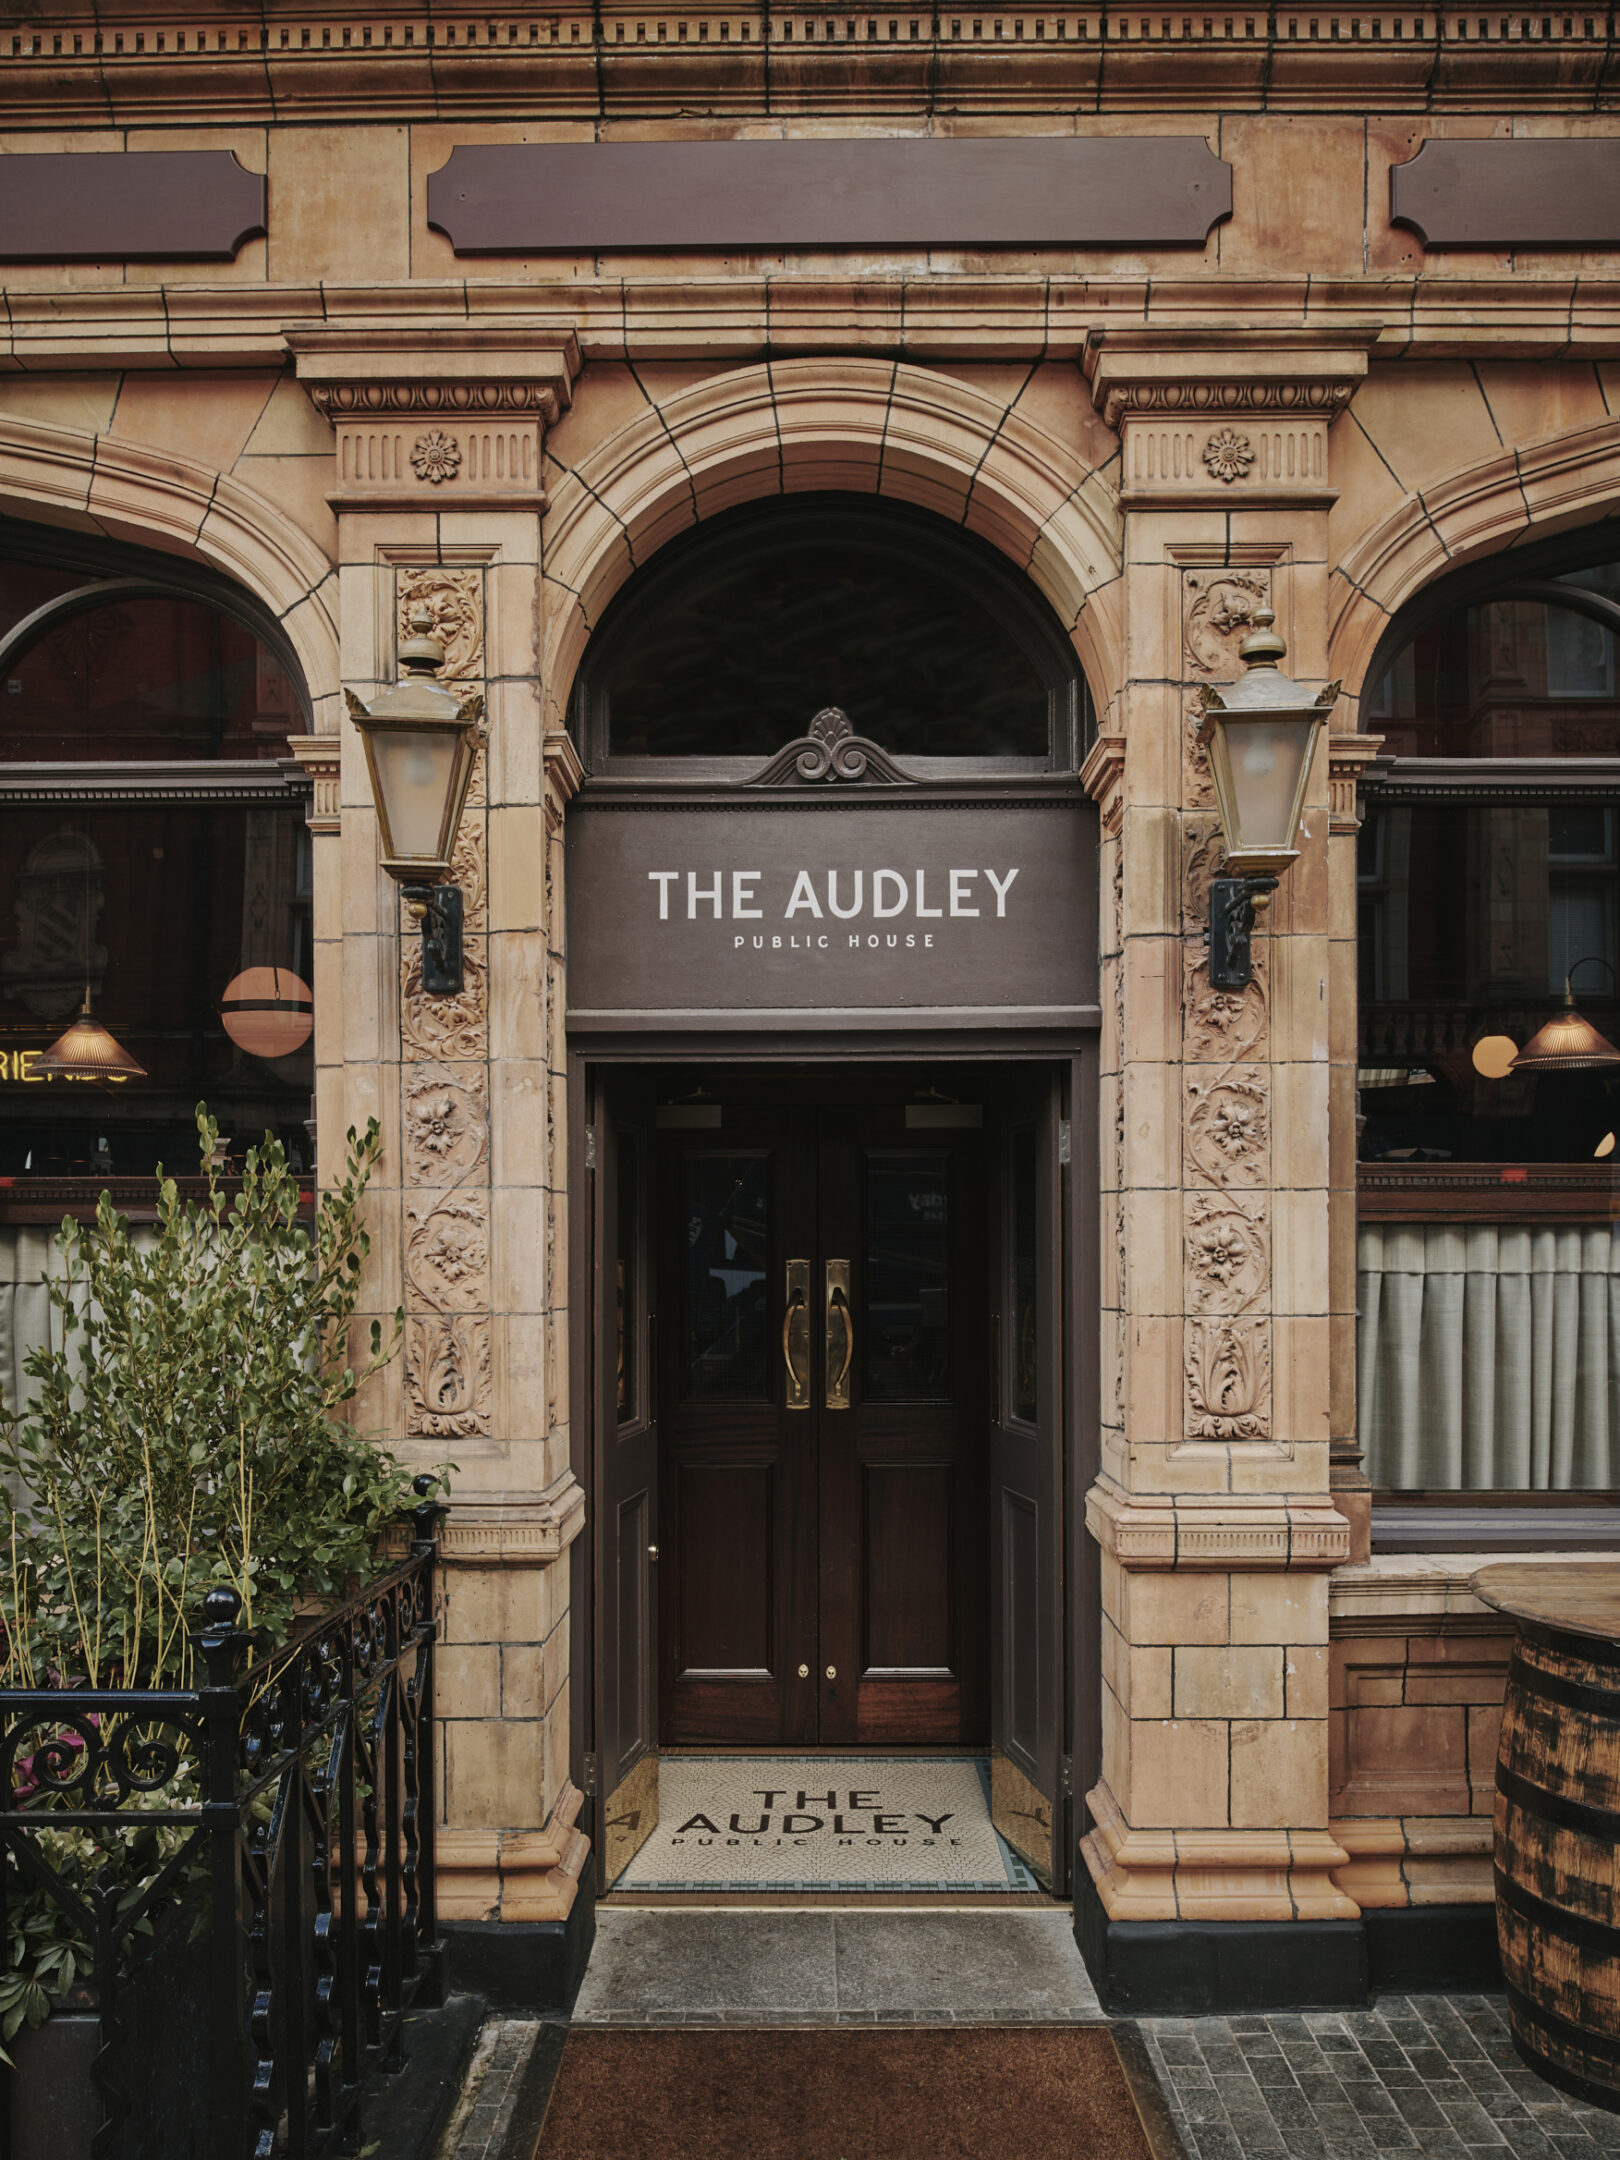 00 The Audley